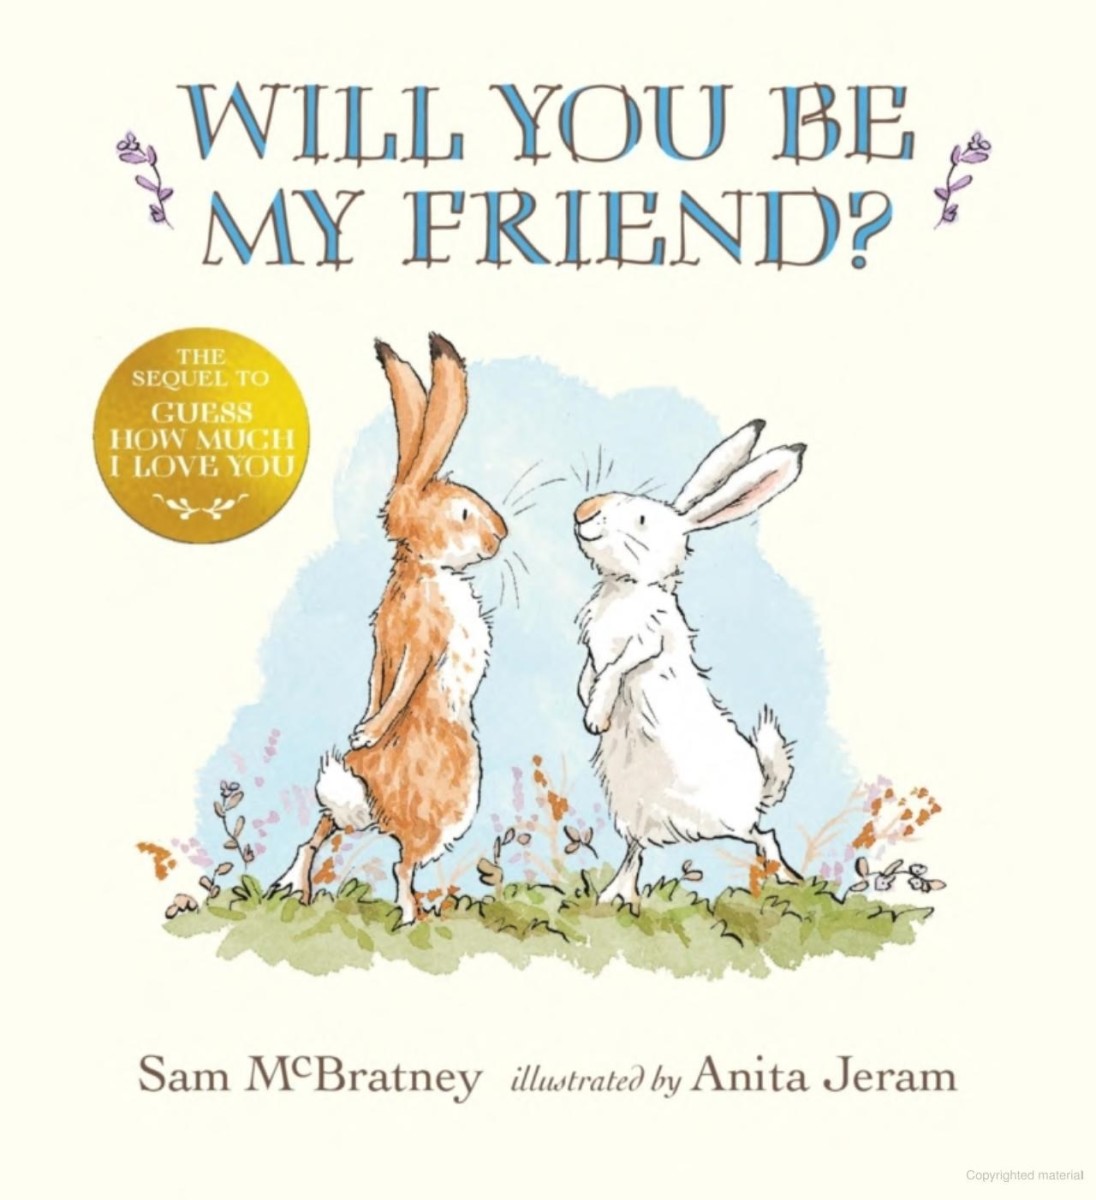 childrens-picture-books-for-valentines-day-love-and-friendship-theme